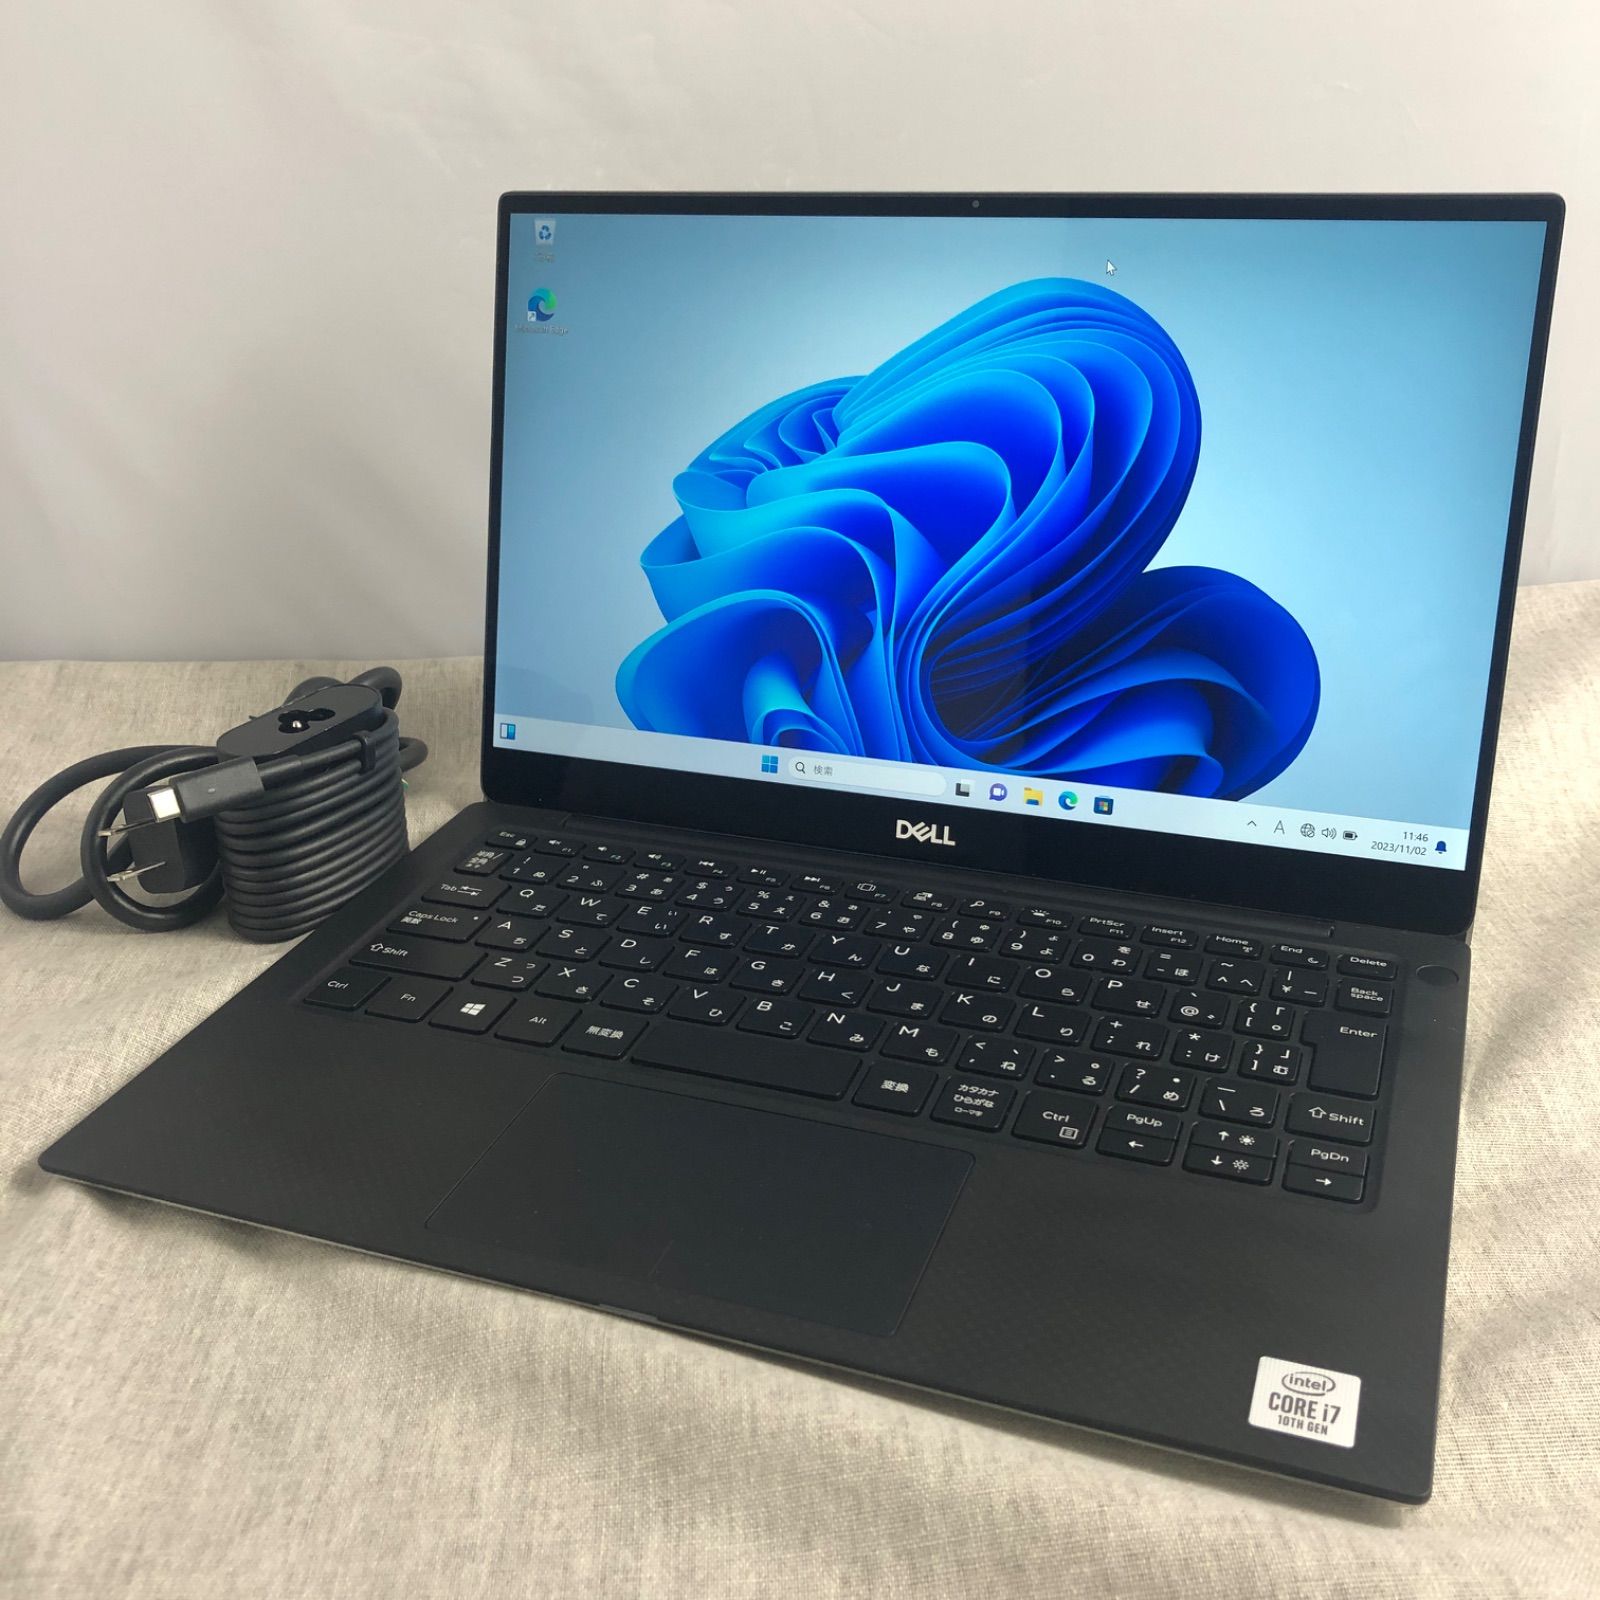 DELL XPS 13 9350 Gold ジャンク - ノートPC